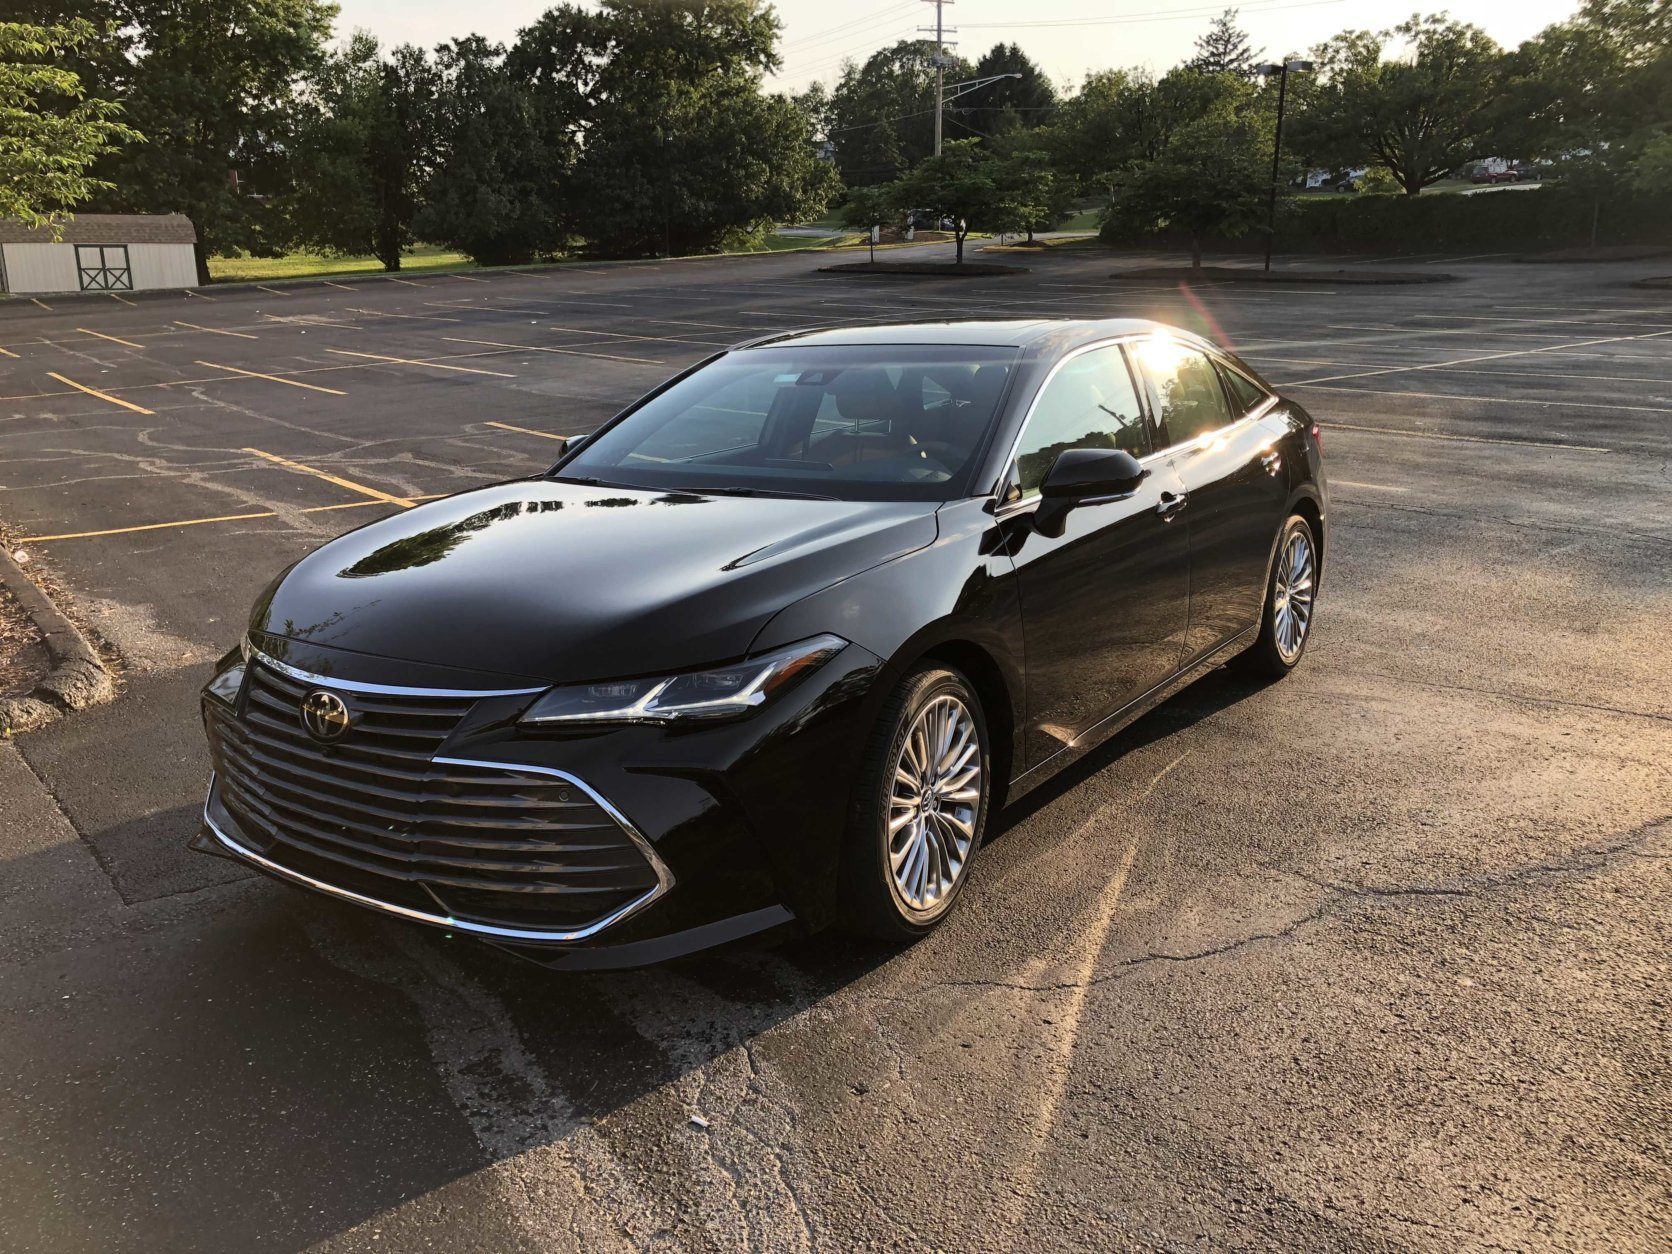 Car Review Toyota remakes the large Avalon sedan adding more luxury